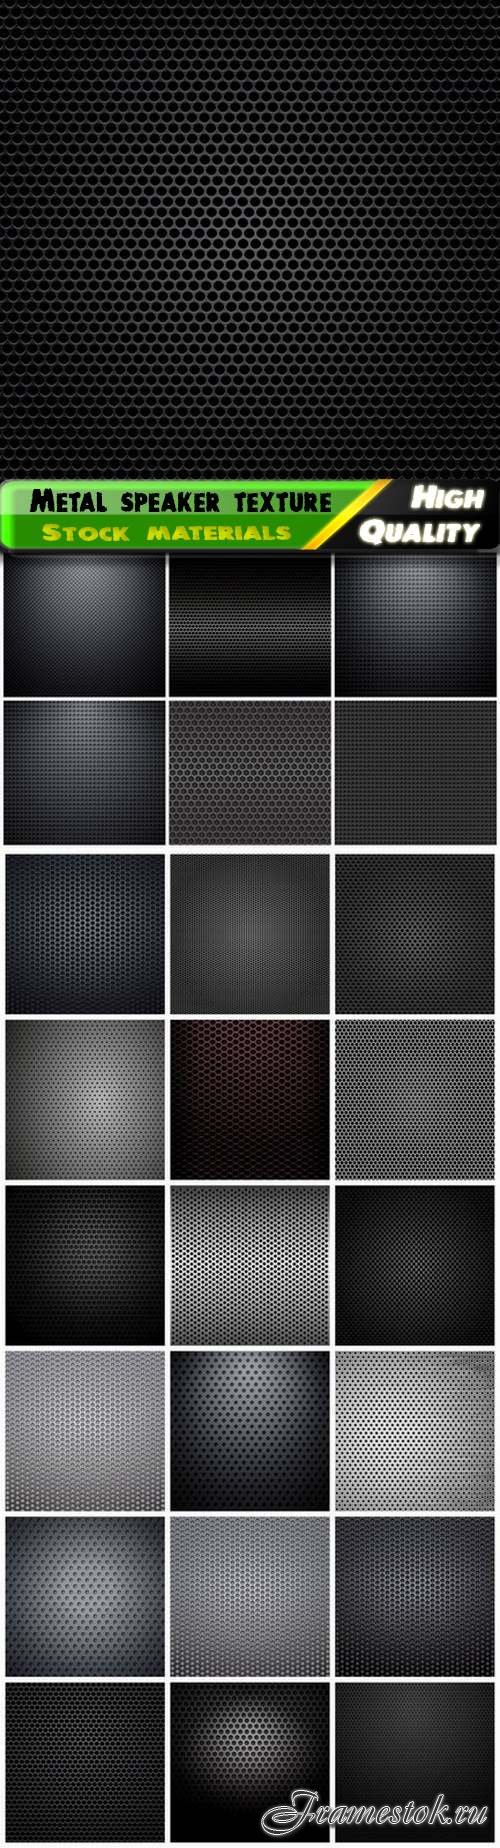 Metal speaker grill texture and backgrounds in little holes - 25 Eps